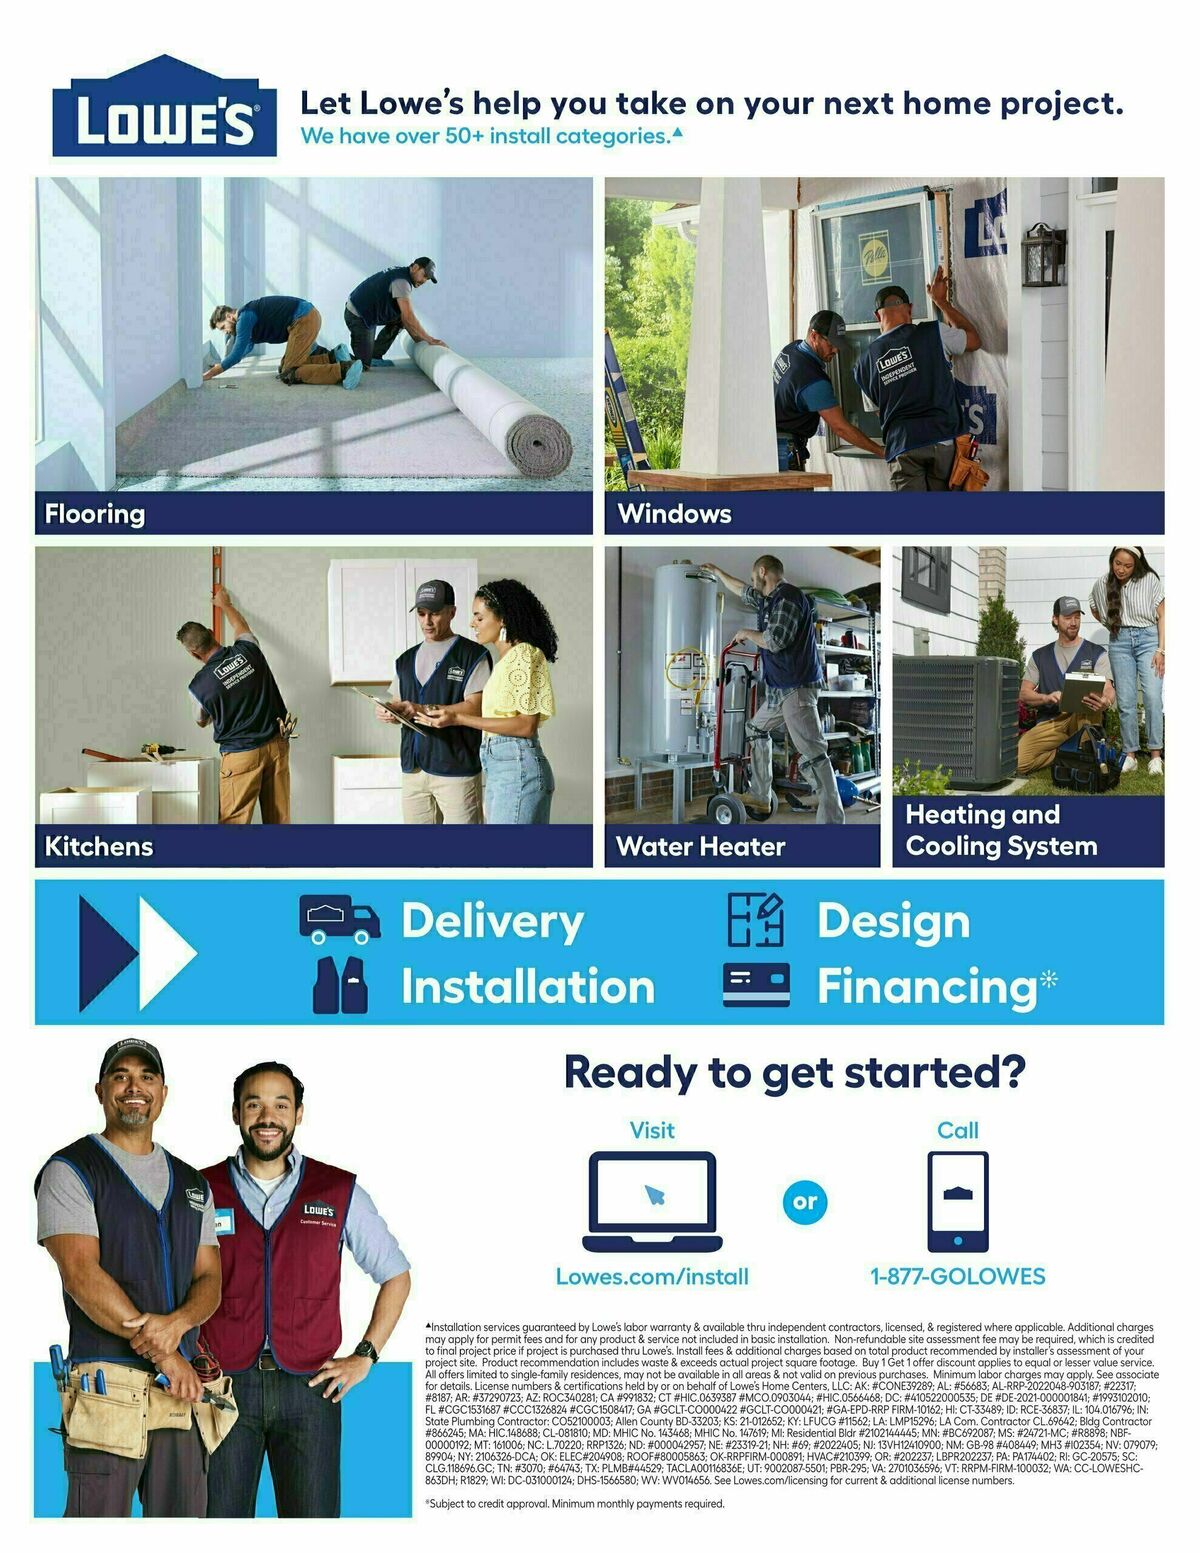 Lowe's Weekly Ad from July 13